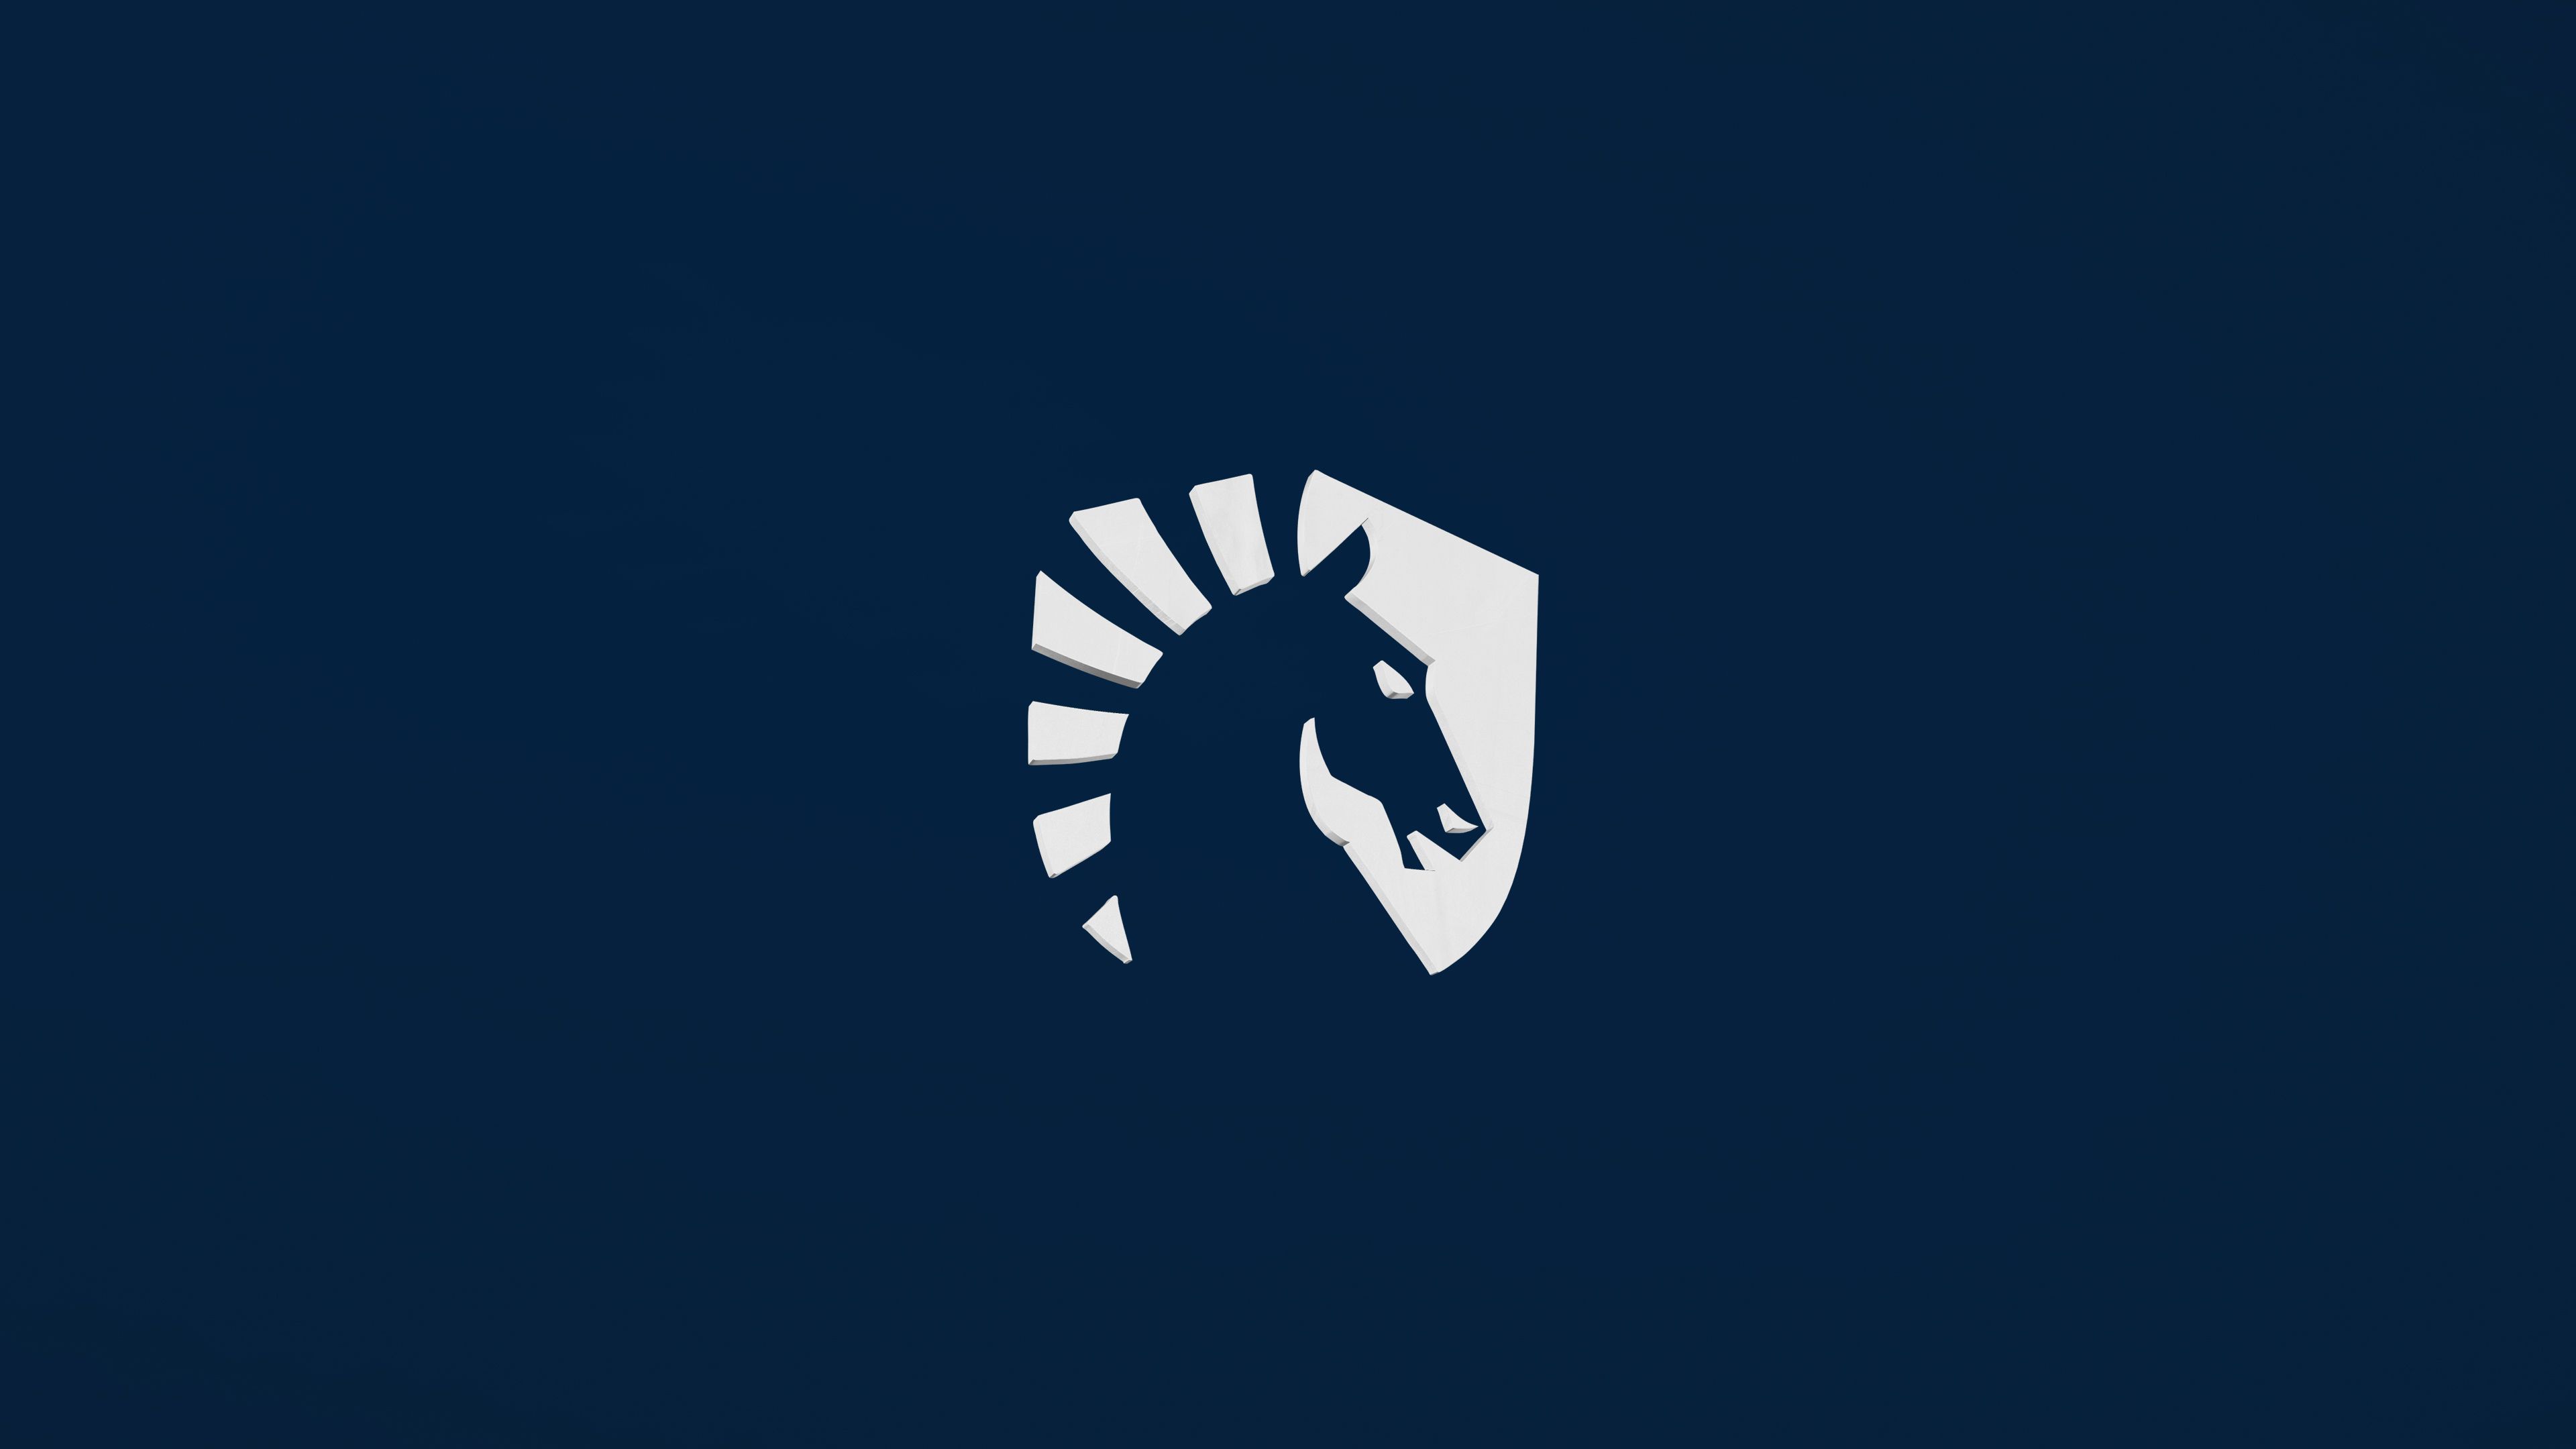 Team Liquid, HD Logo, 4k Wallpaper, Image, Background, Photo and Picture